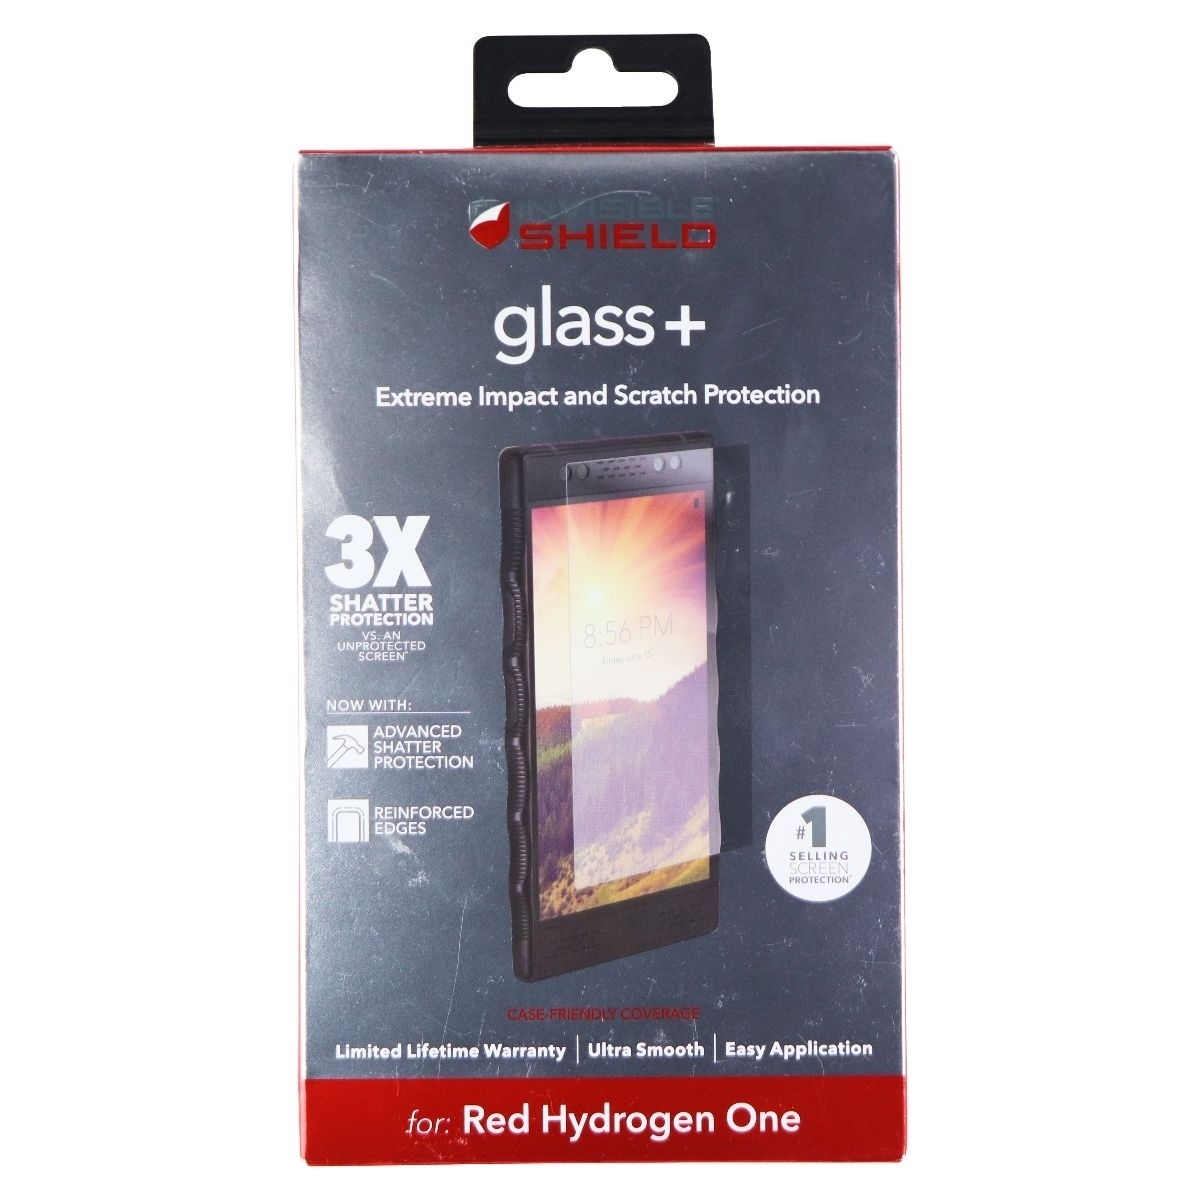 Invisible Shield Glass+ Screen Protector For Verizon Red Hydrogen One - Clear